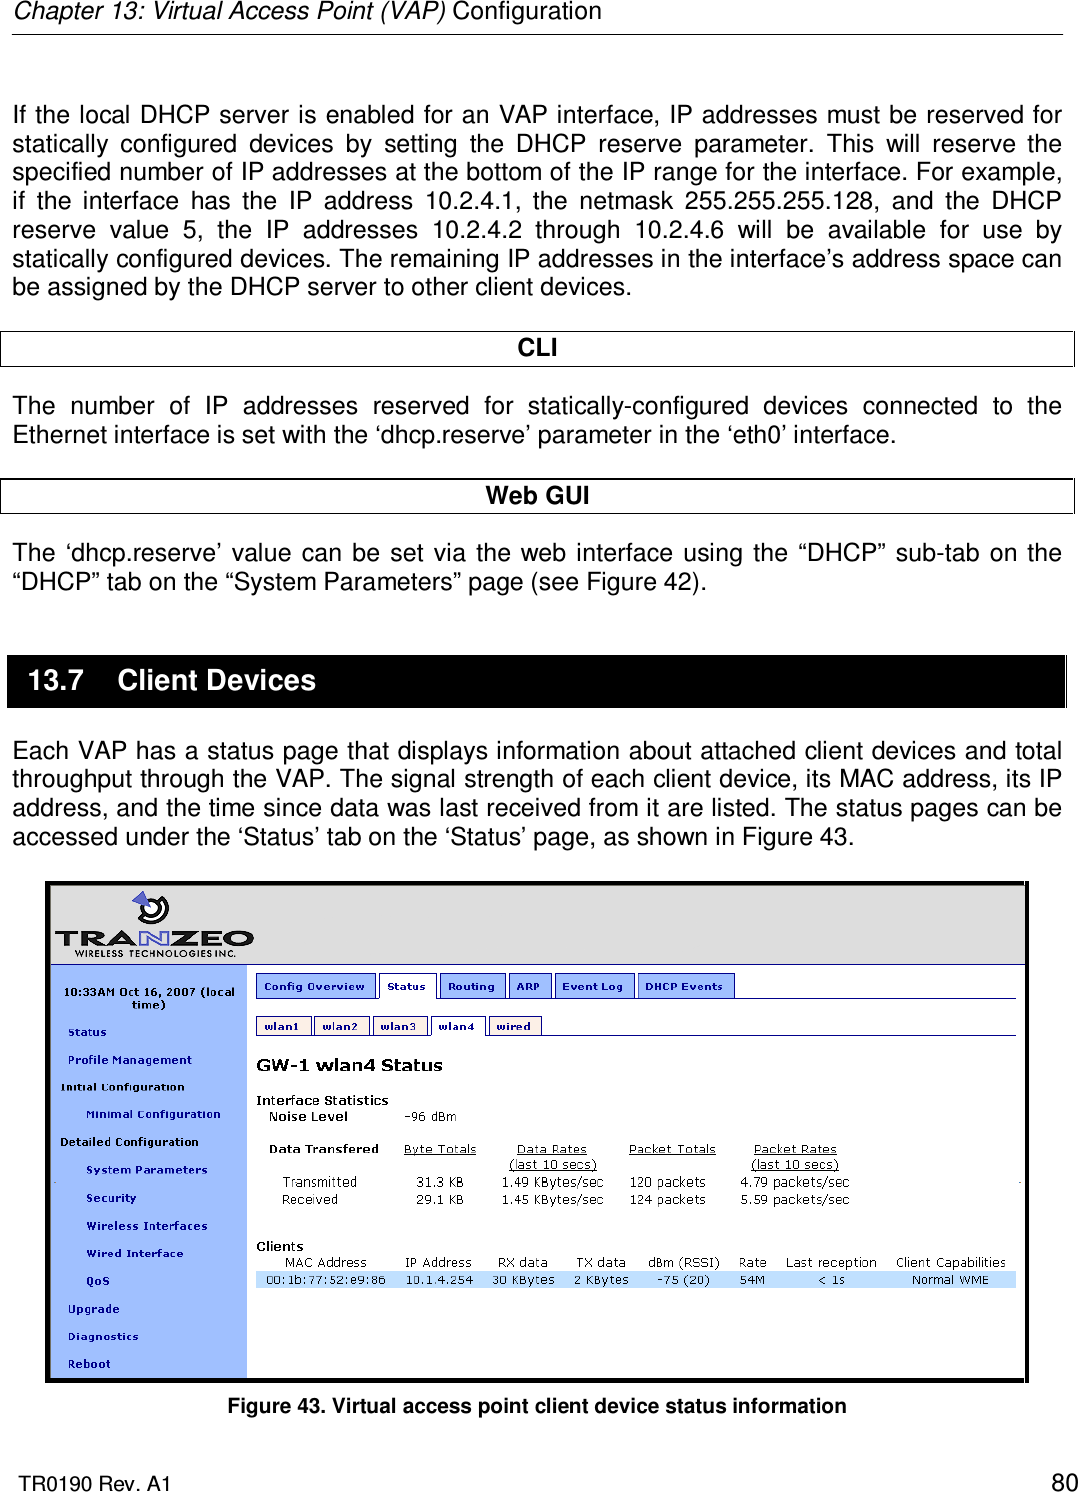 Chapter 13: Virtual Access Point (VAP) Configuration  TR0190 Rev. A1    80  If the local DHCP server is enabled for an VAP interface, IP addresses must be reserved for statically  configured  devices  by  setting  the  DHCP  reserve  parameter.  This  will  reserve  the specified number of IP addresses at the bottom of the IP range for the interface. For example, if  the  interface  has  the  IP  address  10.2.4.1,  the  netmask  255.255.255.128,  and  the  DHCP reserve  value  5,  the  IP  addresses  10.2.4.2  through  10.2.4.6  will  be  available  for  use  by statically configured devices. The remaining IP addresses in the interface’s address space can be assigned by the DHCP server to other client devices.  CLI The  number  of  IP  addresses  reserved  for  statically-configured  devices  connected  to  the Ethernet interface is set with the ‘dhcp.reserve’ parameter in the ‘eth0’ interface.  Web GUI The  ‘dhcp.reserve’ value can be  set  via the web  interface  using the “DHCP”  sub-tab on the “DHCP” tab on the “System Parameters” page (see Figure 42).  13.7  Client Devices Each VAP has a status page that displays information about attached client devices and total throughput through the VAP. The signal strength of each client device, its MAC address, its IP address, and the time since data was last received from it are listed. The status pages can be accessed under the ‘Status’ tab on the ‘Status’ page, as shown in Figure 43.   Figure 43. Virtual access point client device status information 